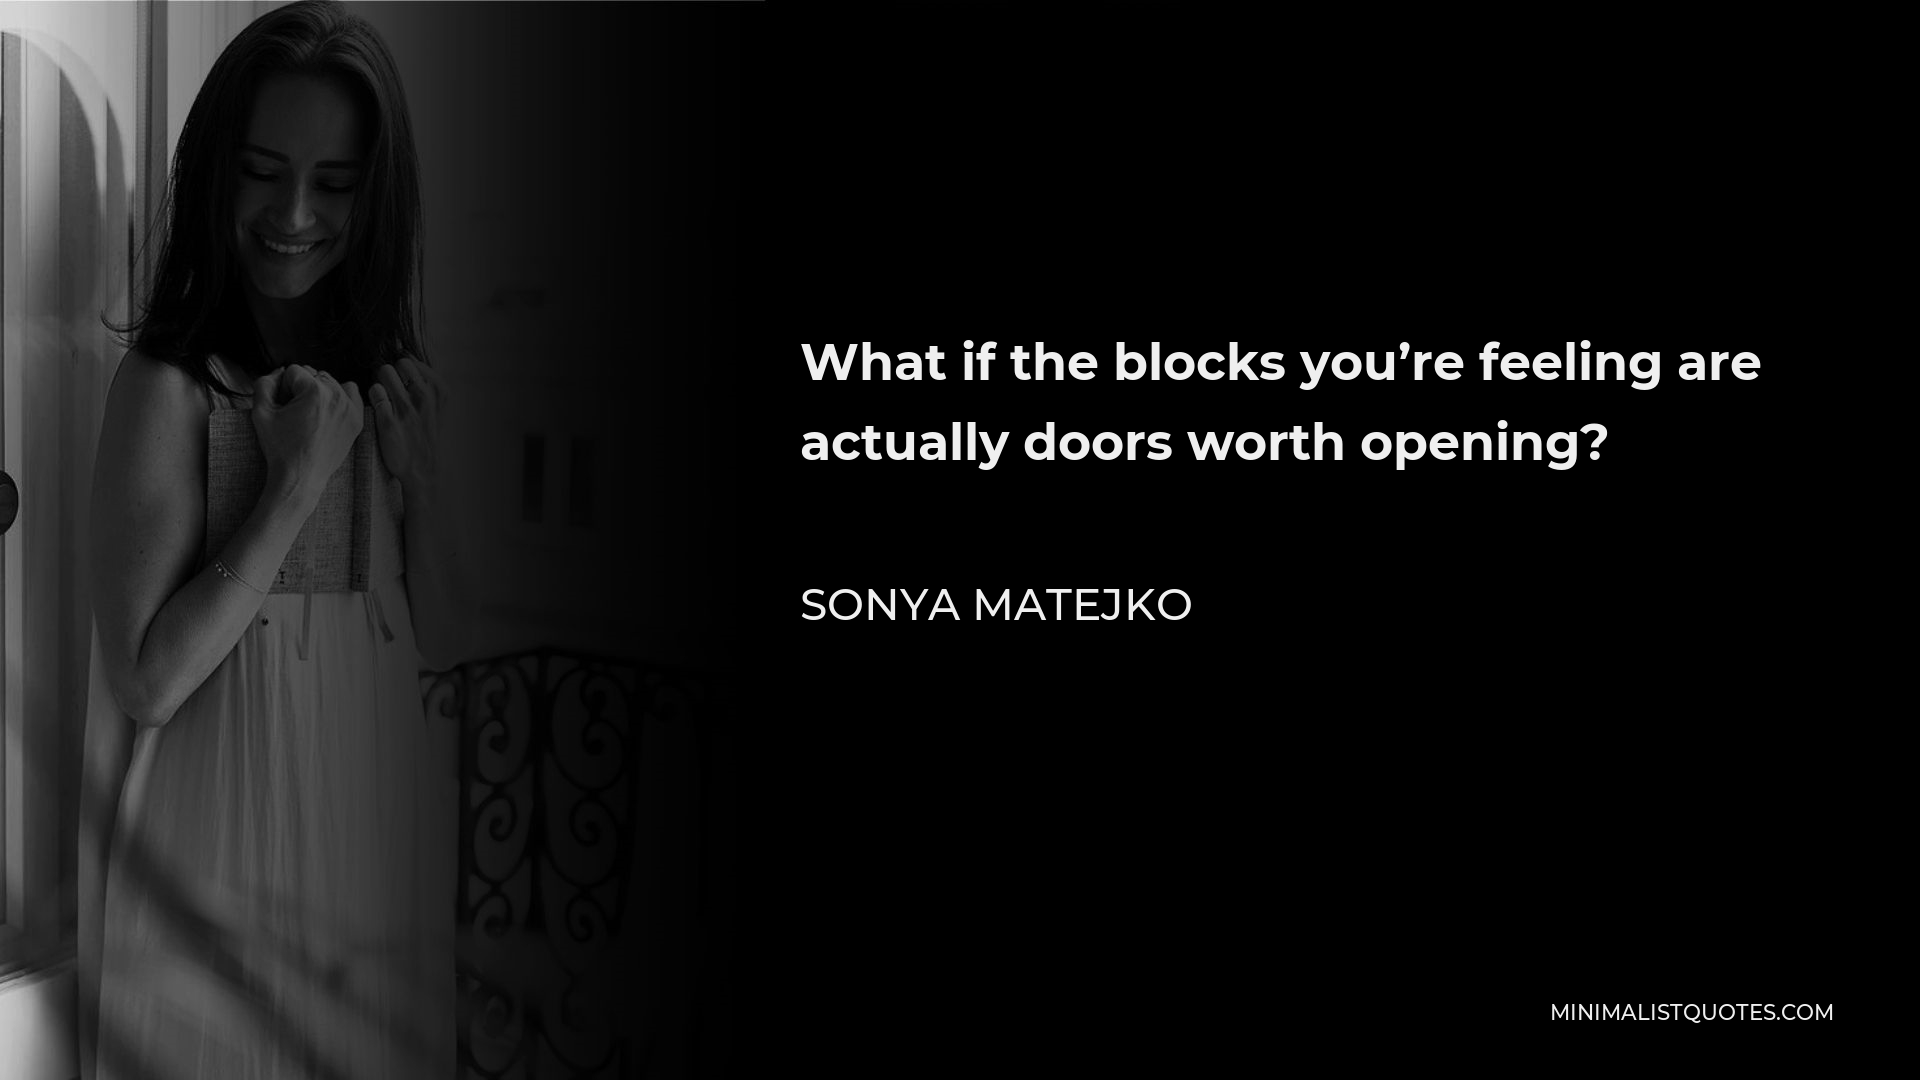 Sonya Matejko Quote - What if the blocks you’re feeling are actually doors worth opening?